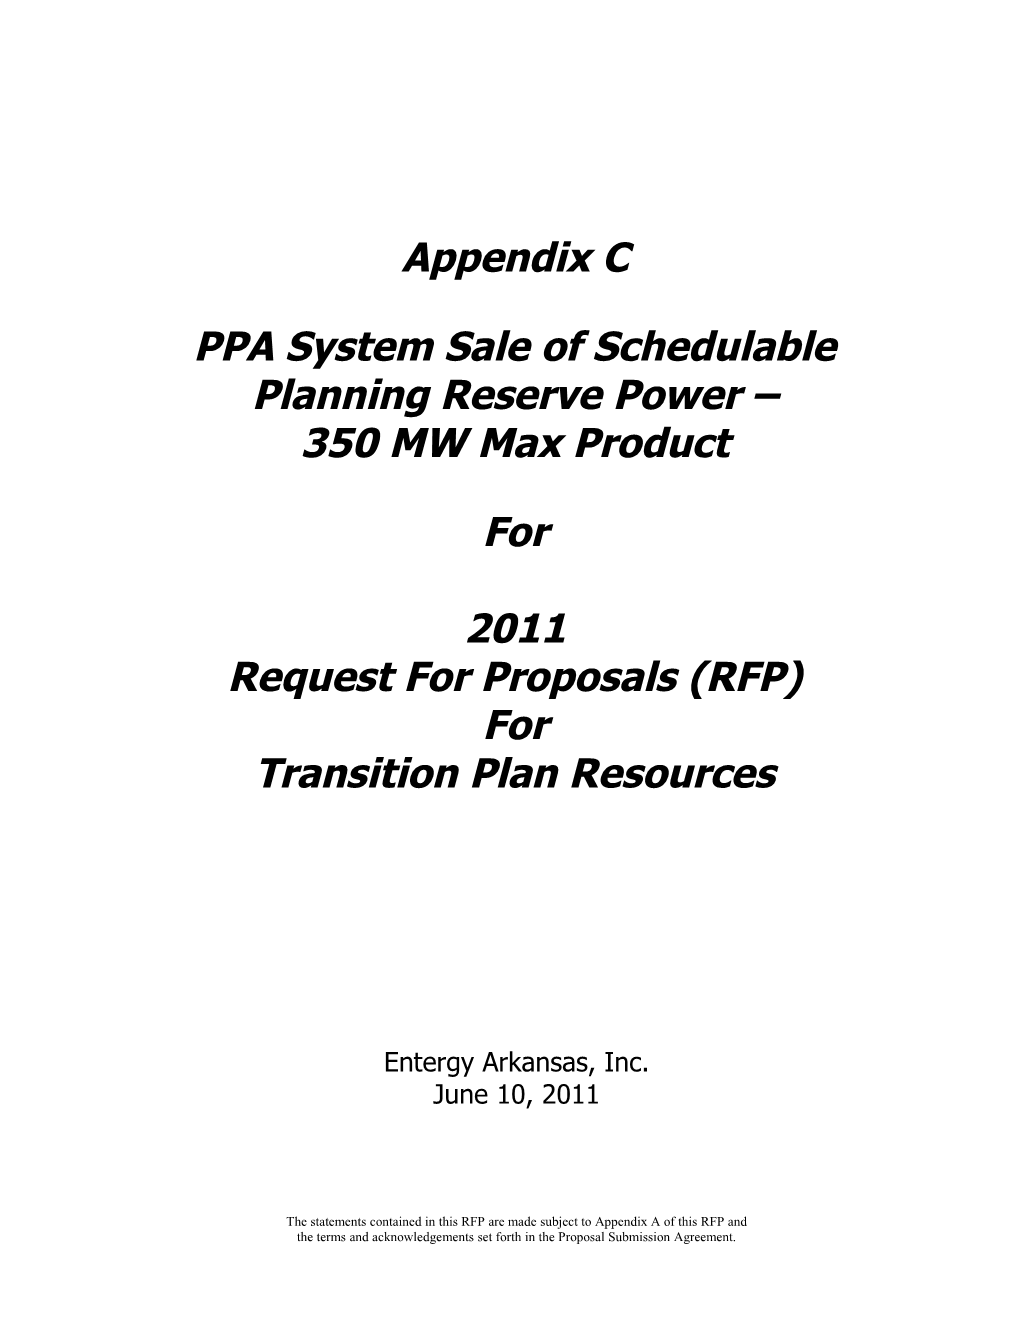 PPA System Sale of Schedulable Planning Reserve Power